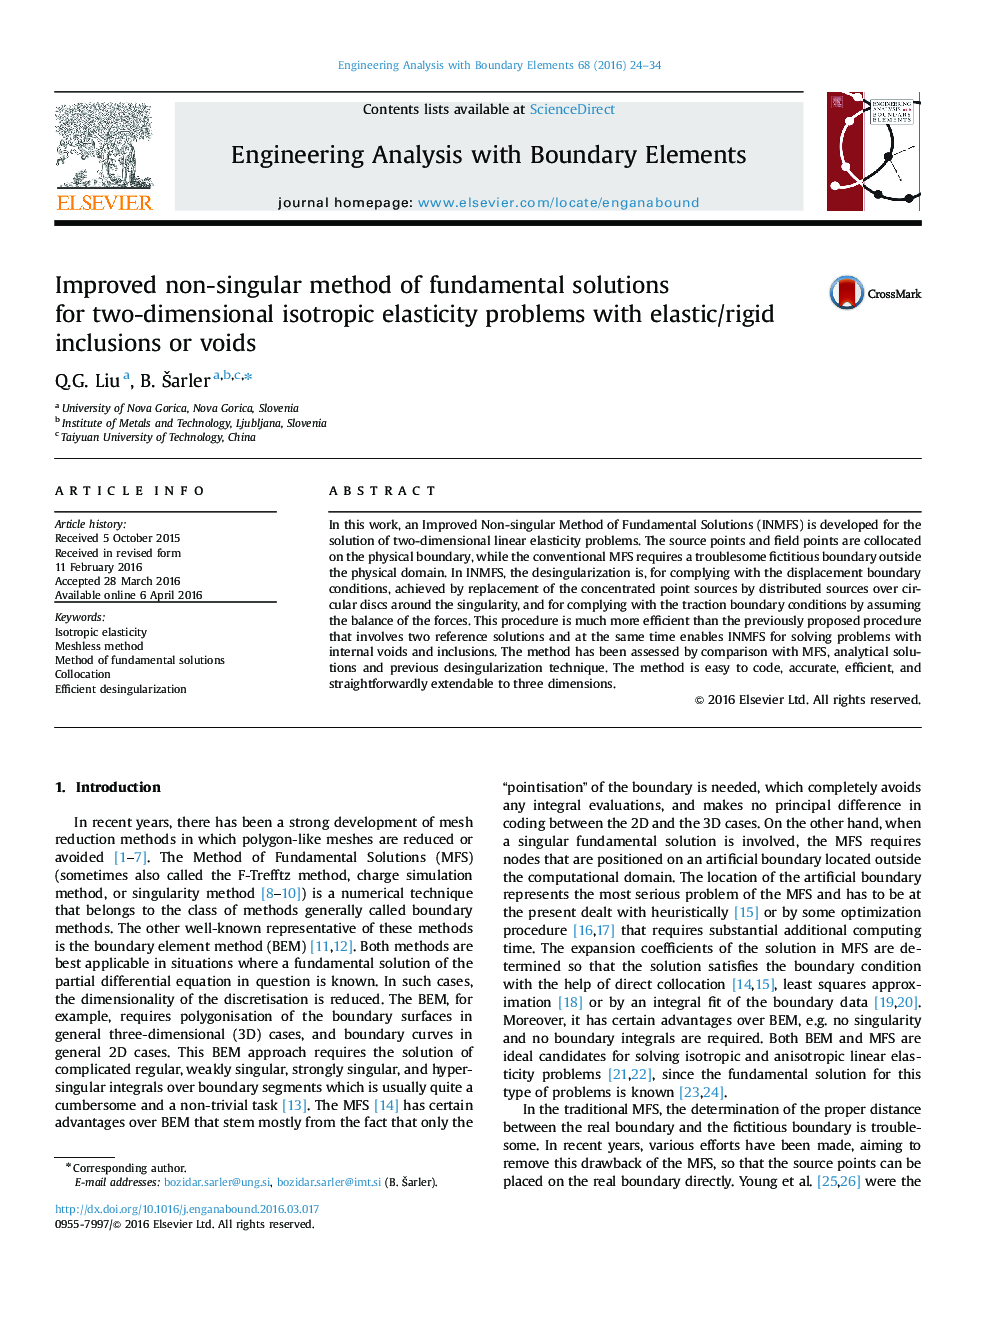 Improved non-singular method of fundamental solutions for two-dimensional isotropic elasticity problems with elastic/rigid inclusions or voids